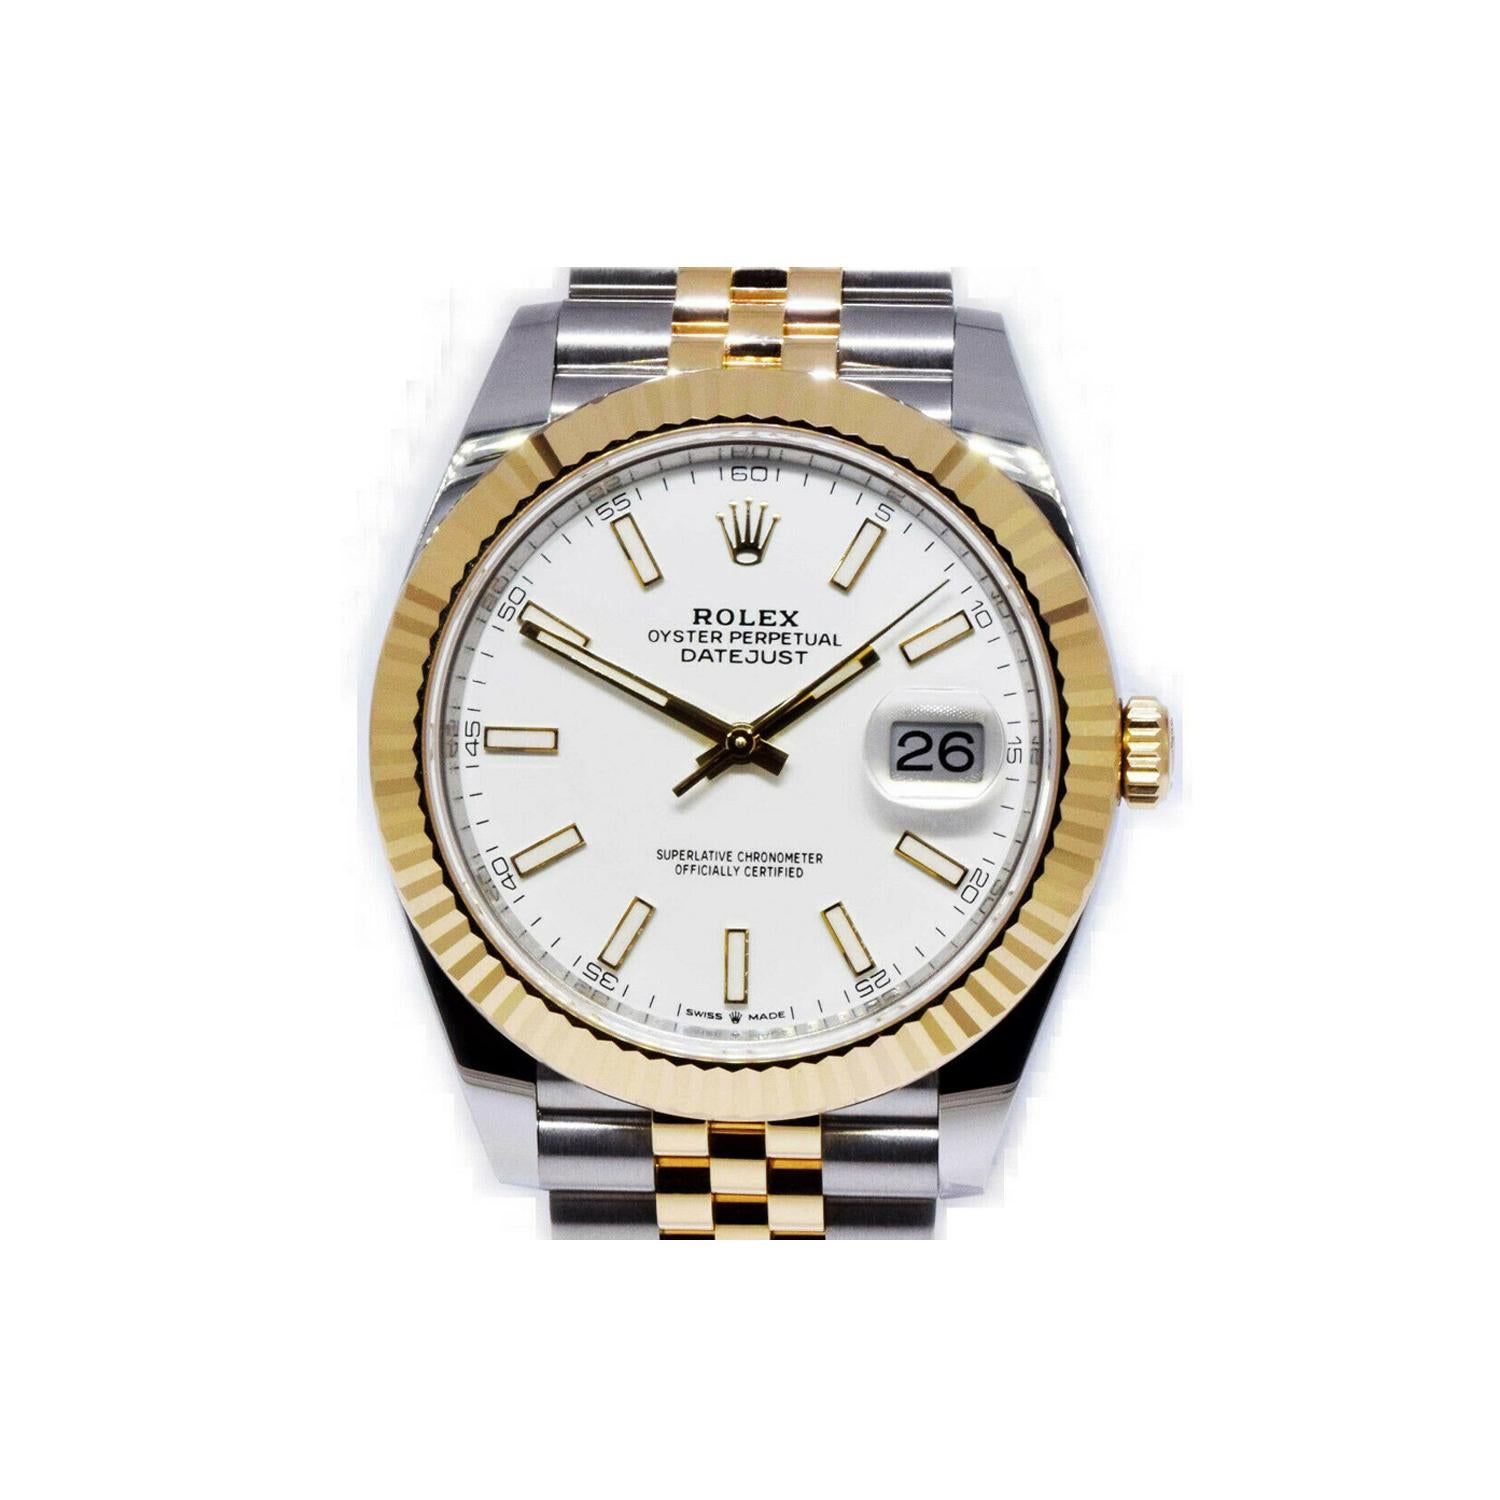 This brand new Rolex  126333 is a beautiful men's timepiece that is powered by mechanical (automatic) movement which is cased in a stainless steel case. It has a round shape face, date indicator dial and has hand sticks style markers. It is